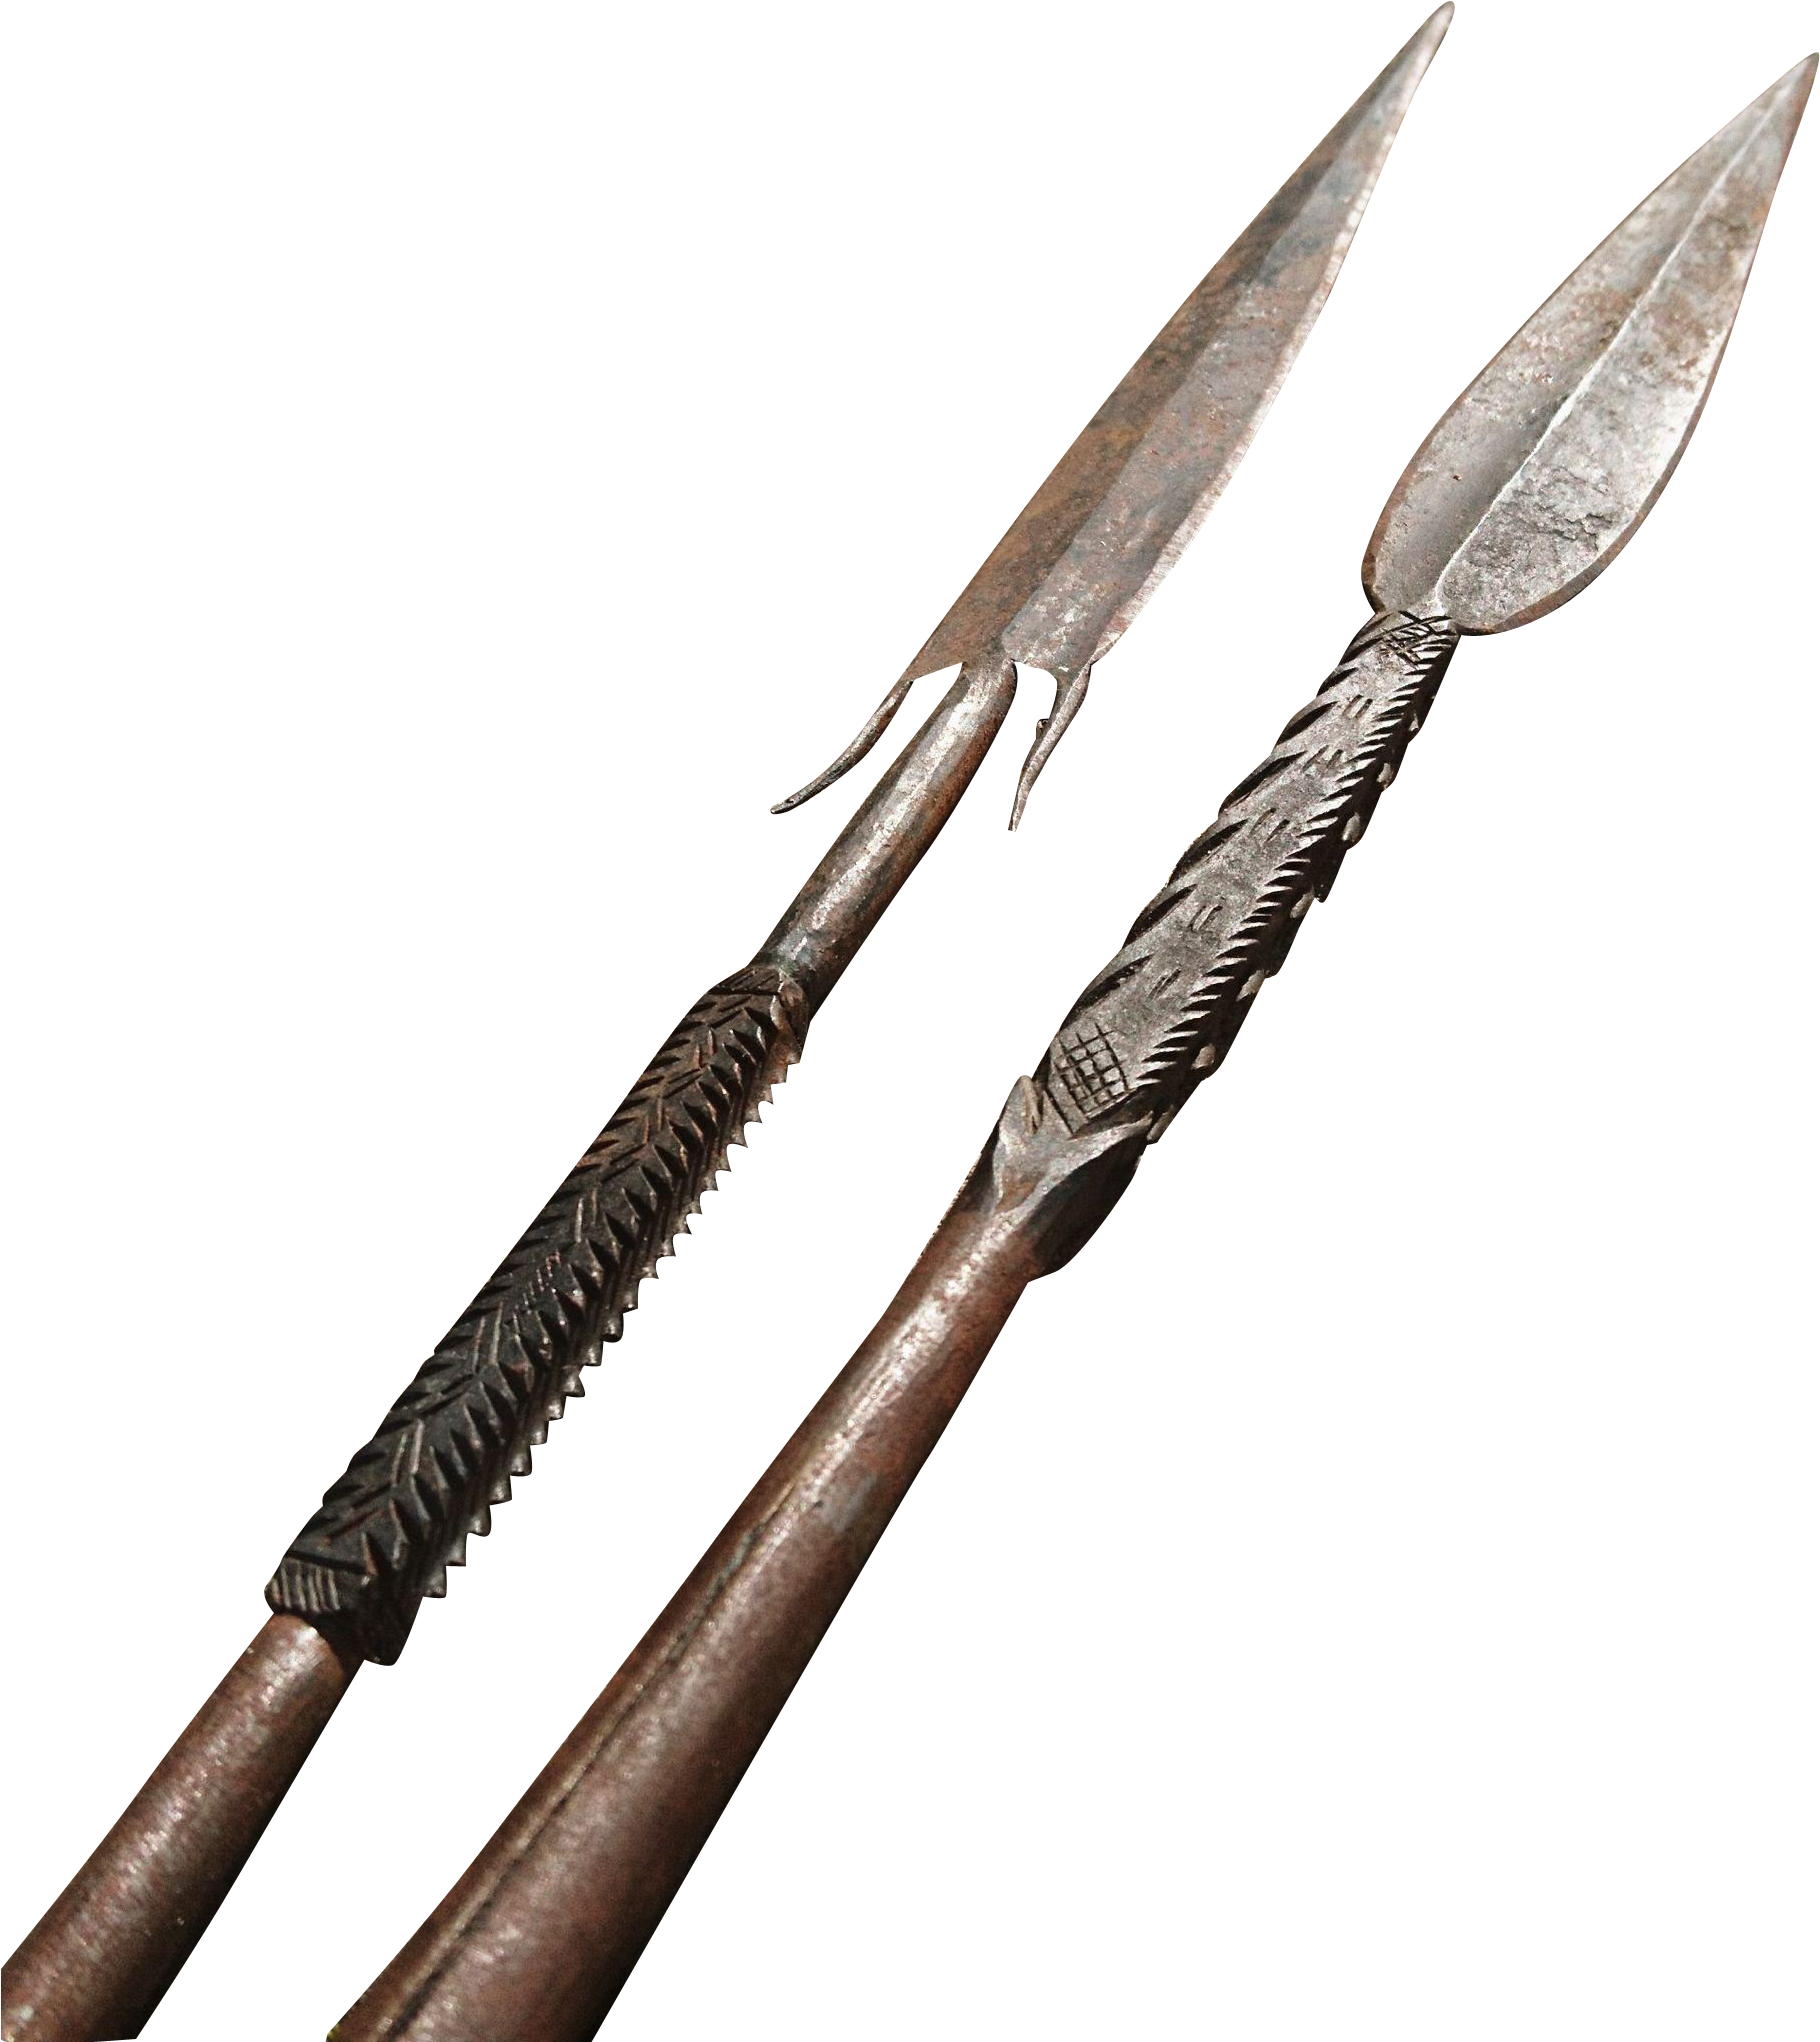 A Close Up Of A Spear